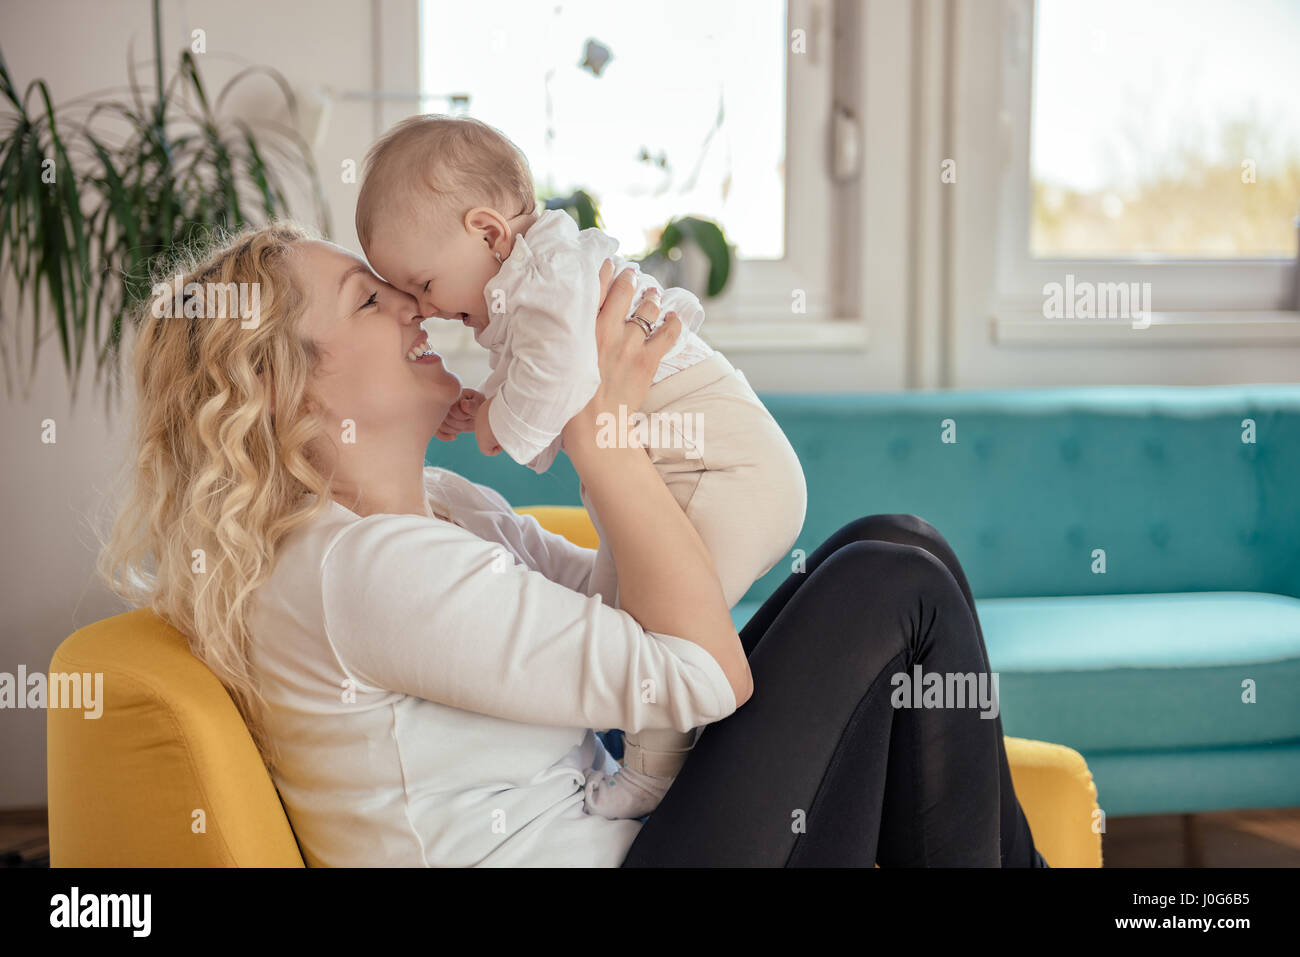 Mother and her baby head to head sitting at yellow armchair Stock Photo